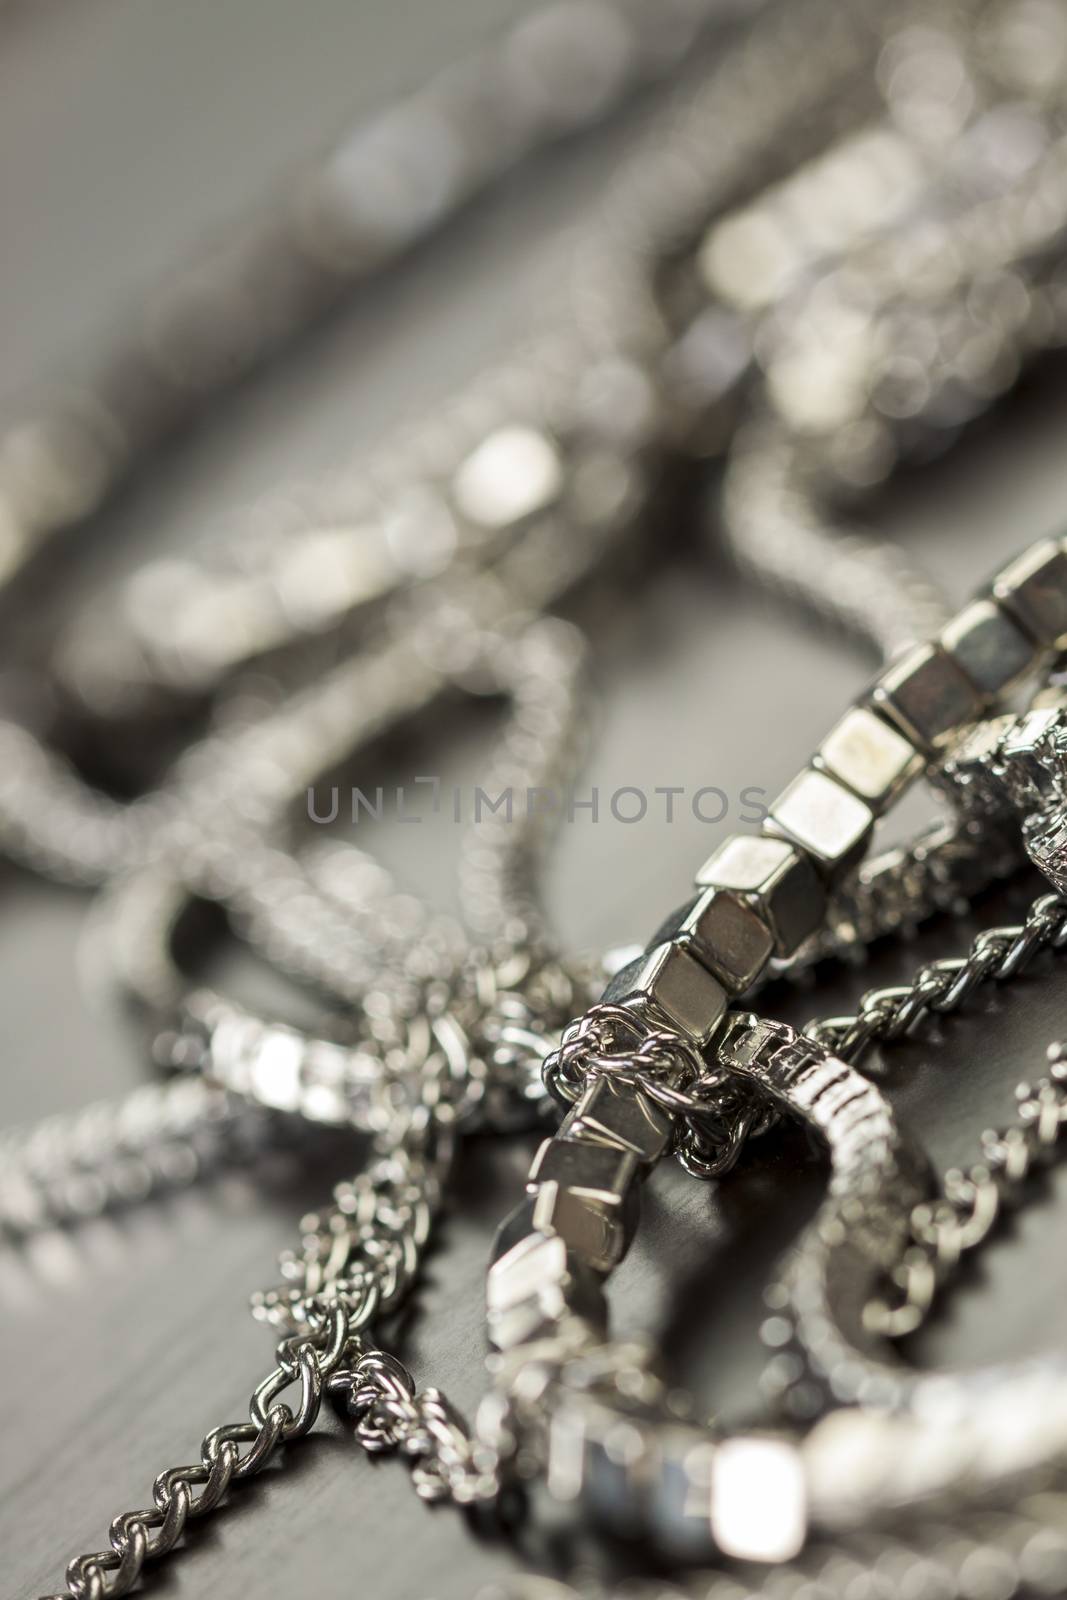 Pile of assorted silver chains with shiny box chains, cube chains and ordinary linked chain on a grey background conceptual of fashion jewellery